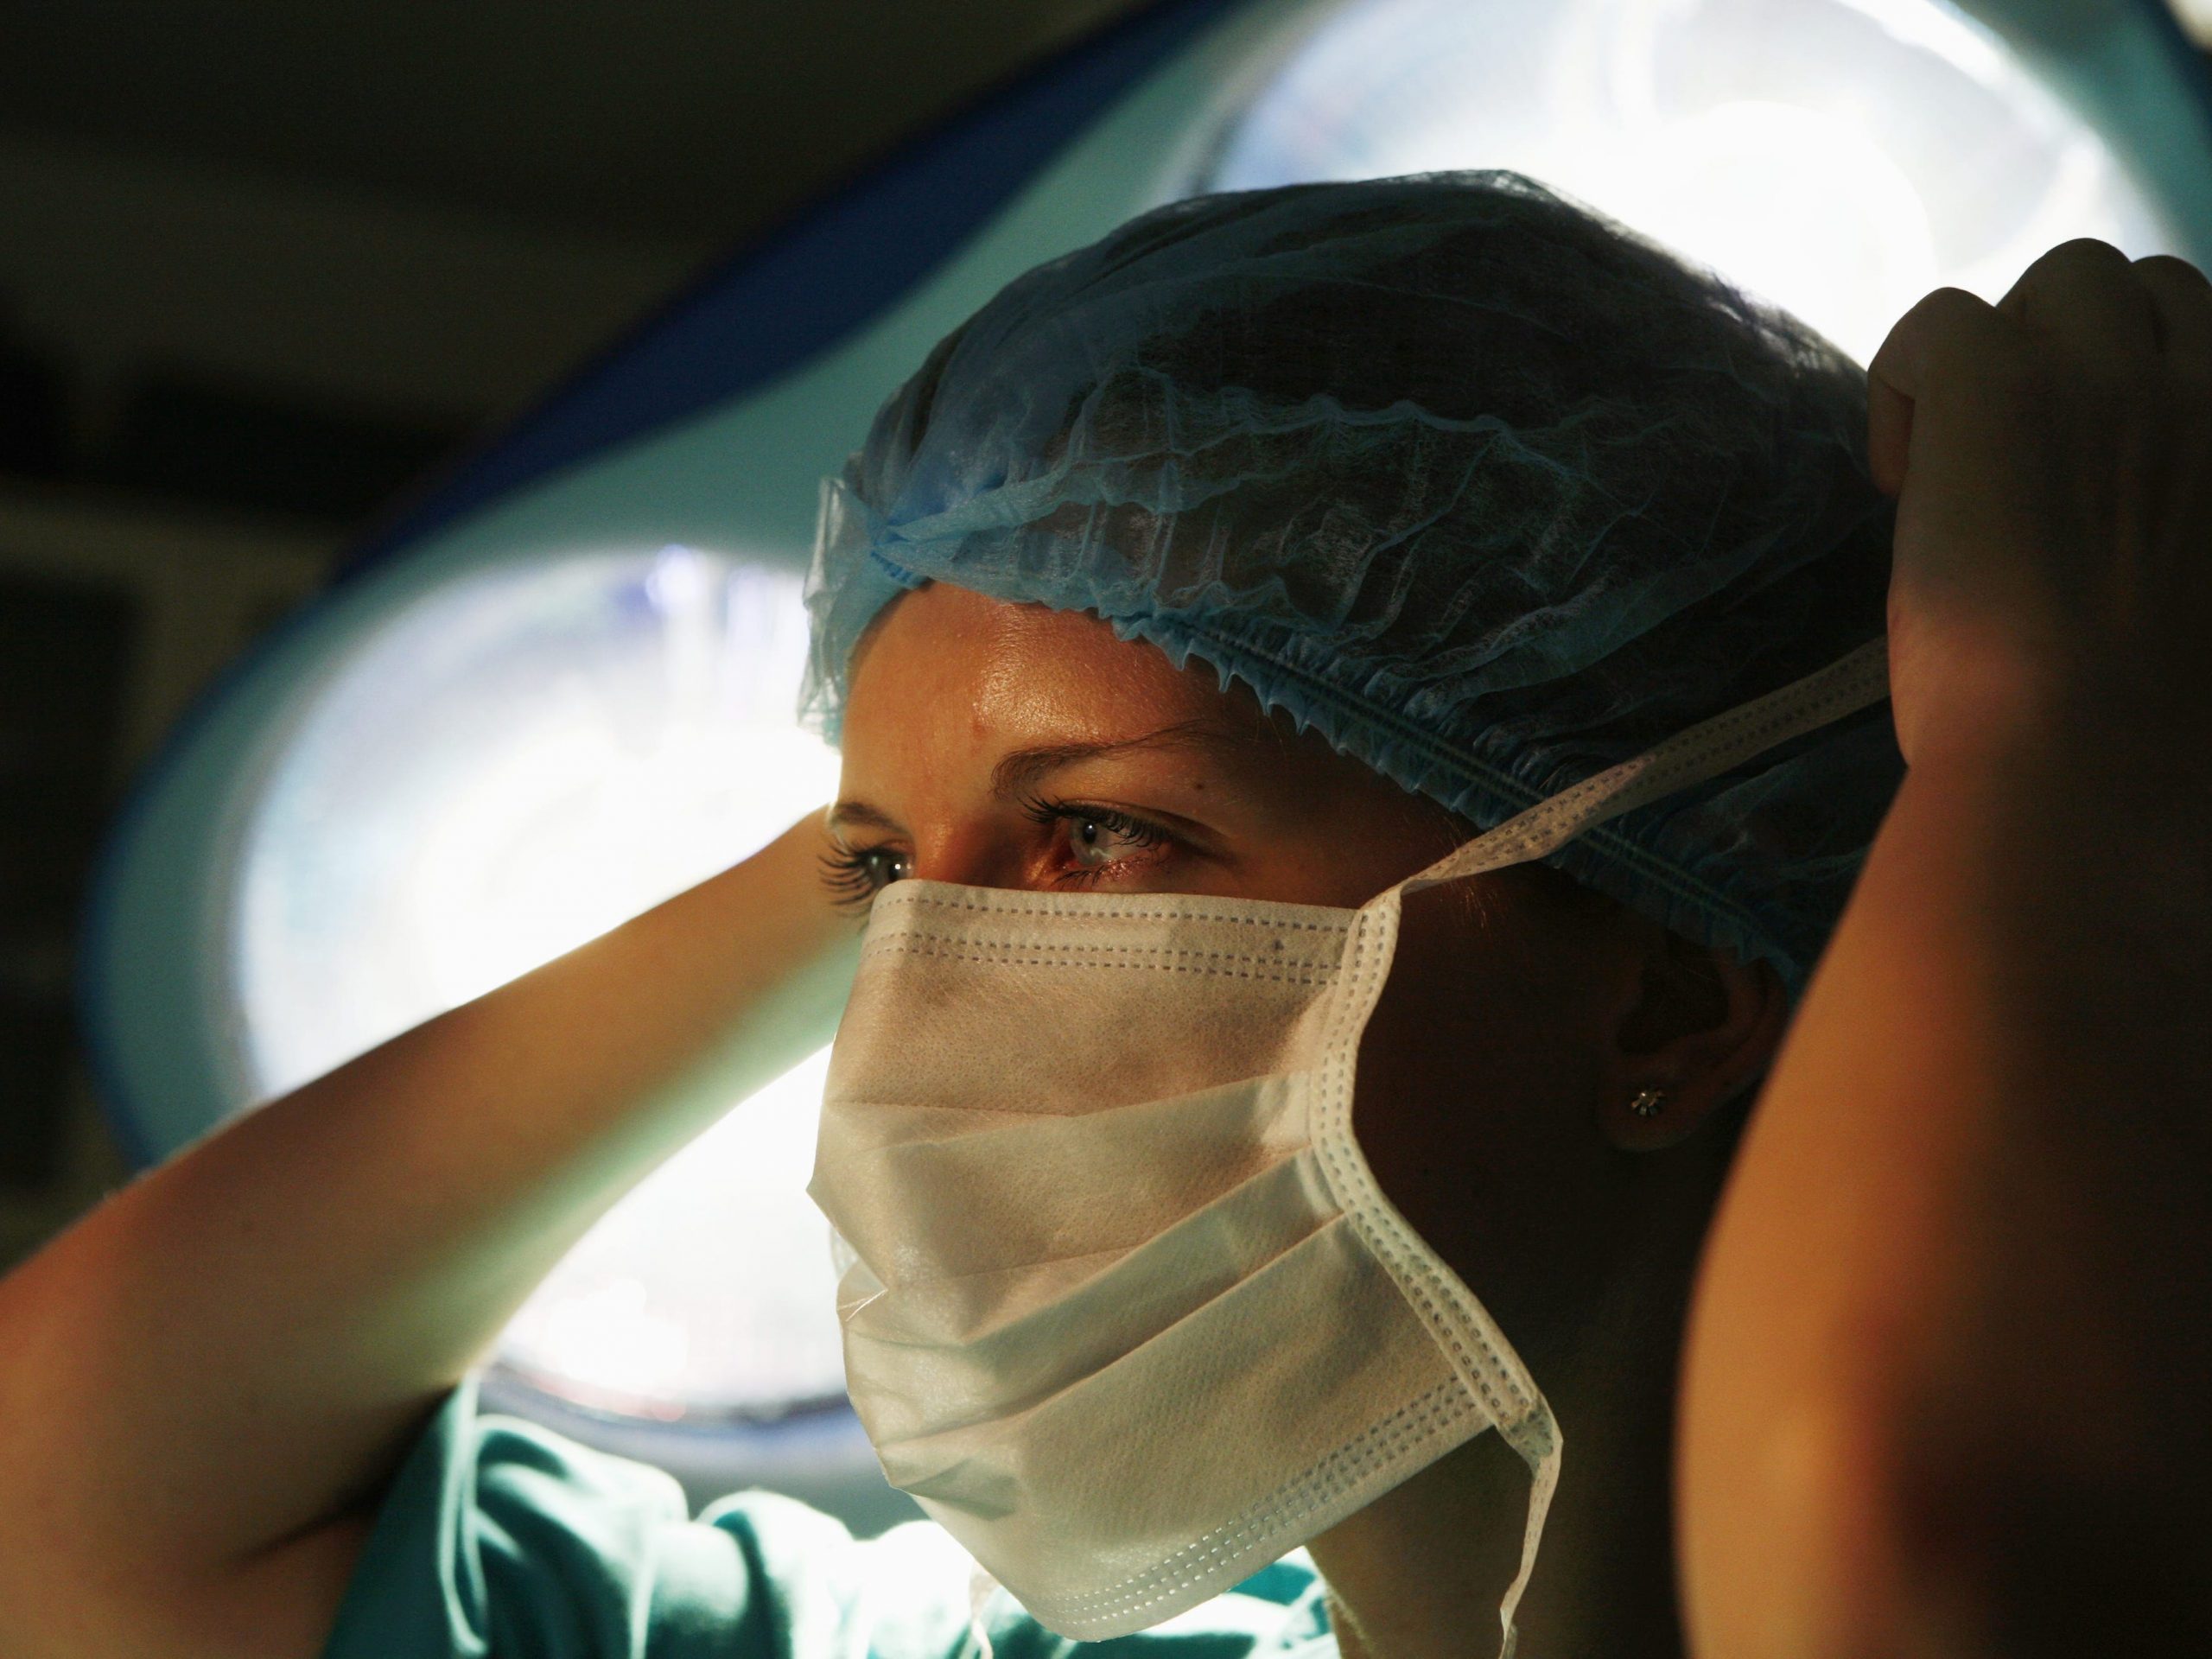 Female surgeon ties her surgical mask around her face underneath operation lights.